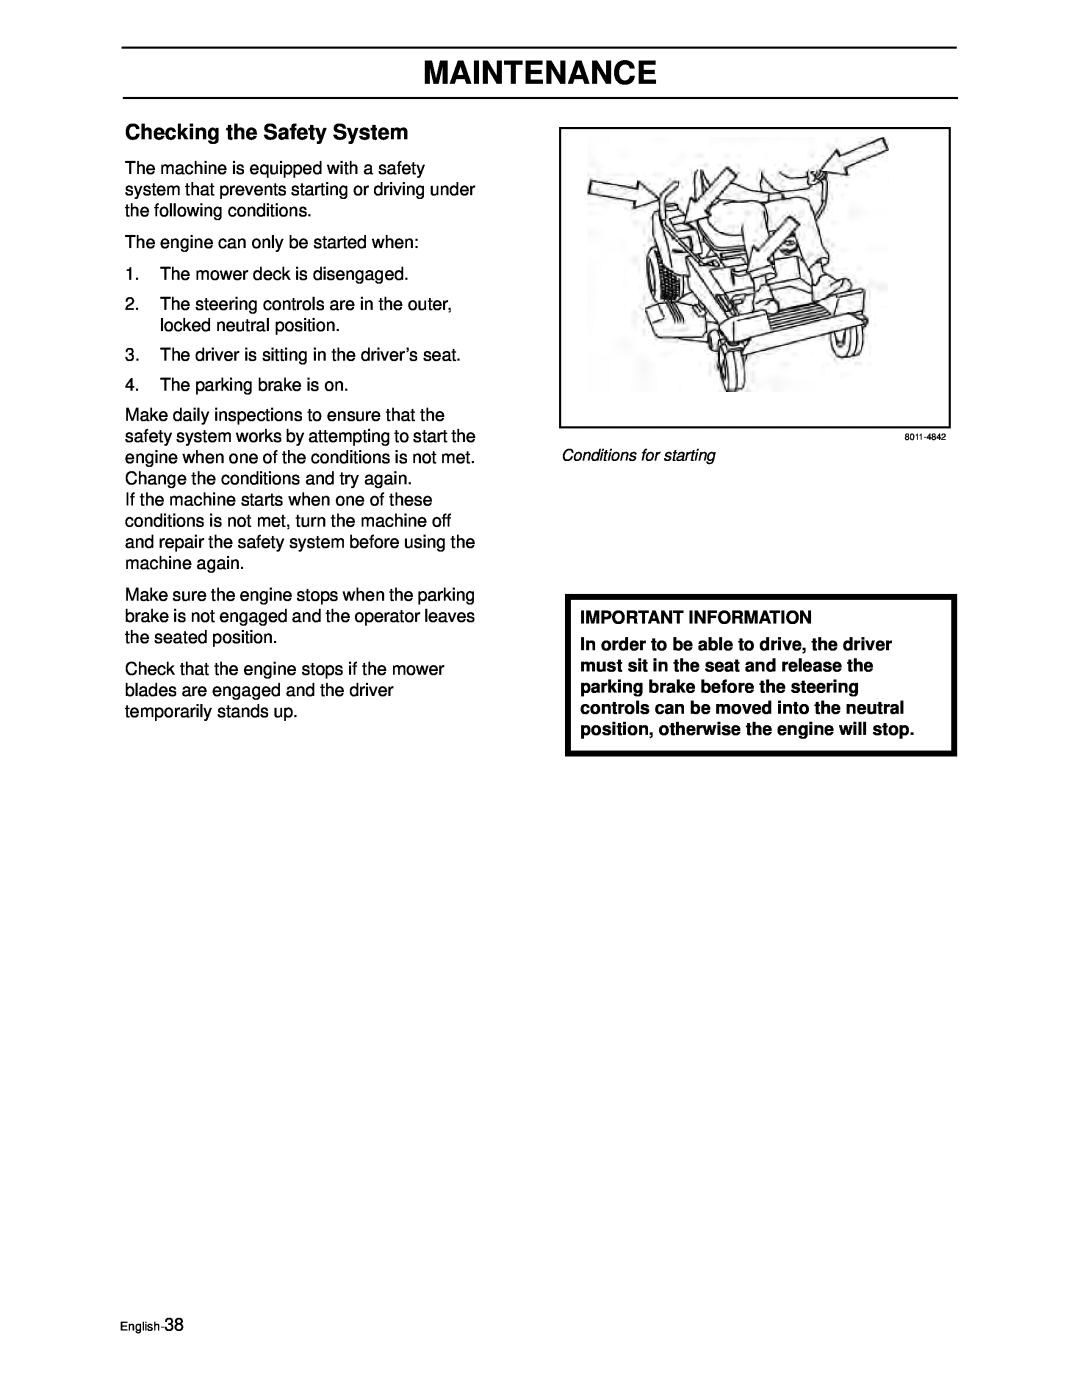 Poulan PZ4822 manual Checking the Safety System, Maintenance, Important Information 